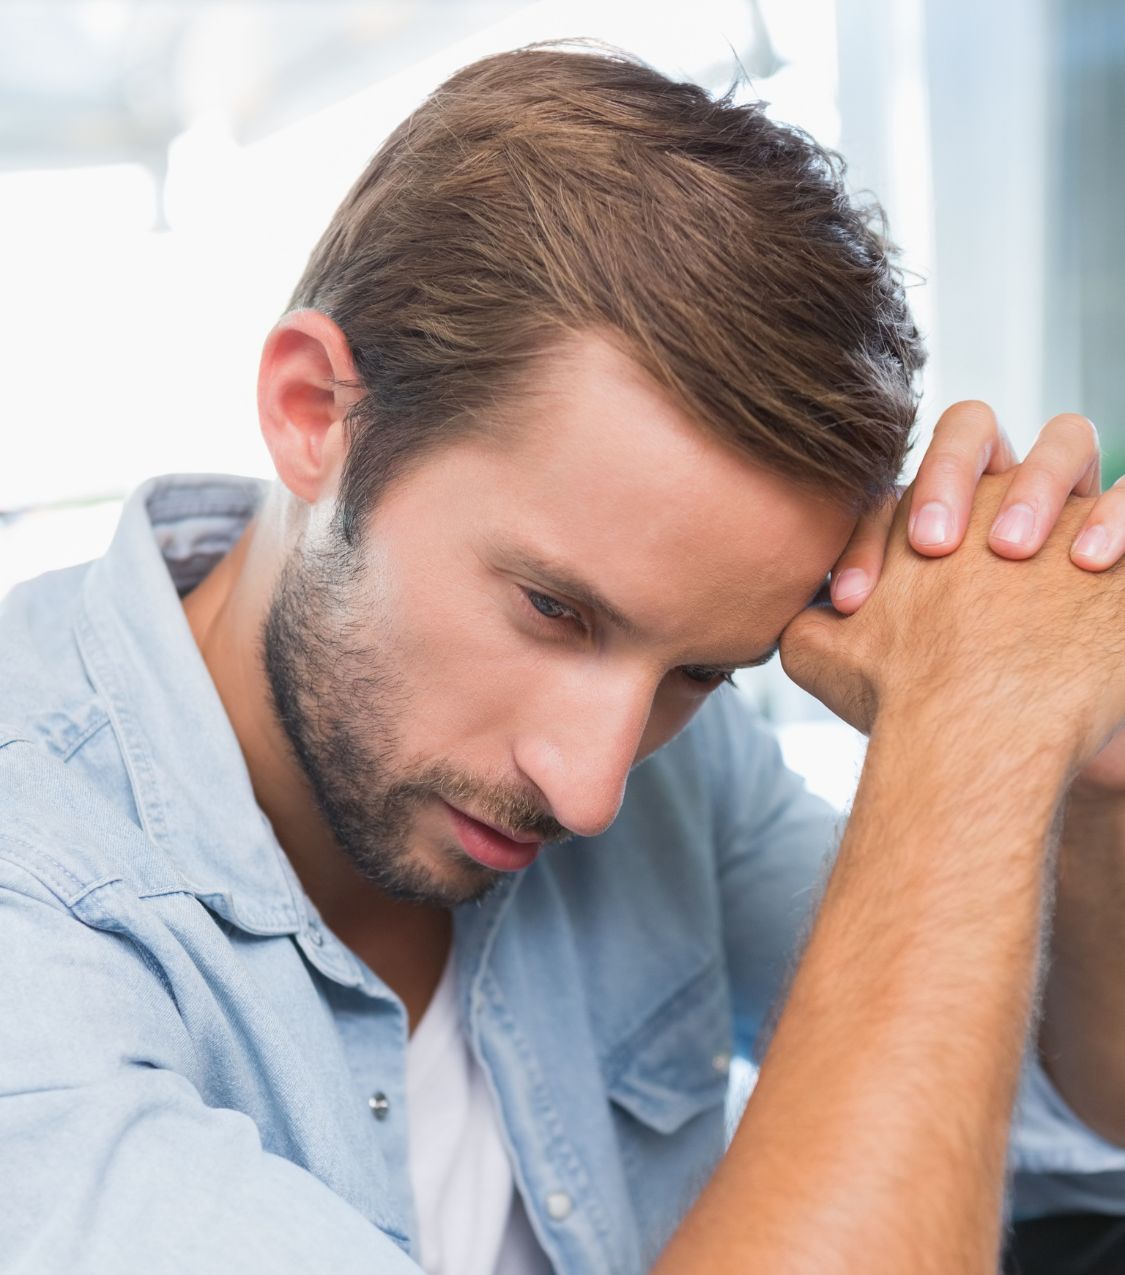 A man leaning his head on his hands, as if he is thinking how conflict avoidance can lead to infidelity. Affair recovery program in the United States can help couples survive infidelity. Schedule a consultation with Relationship Experts today.